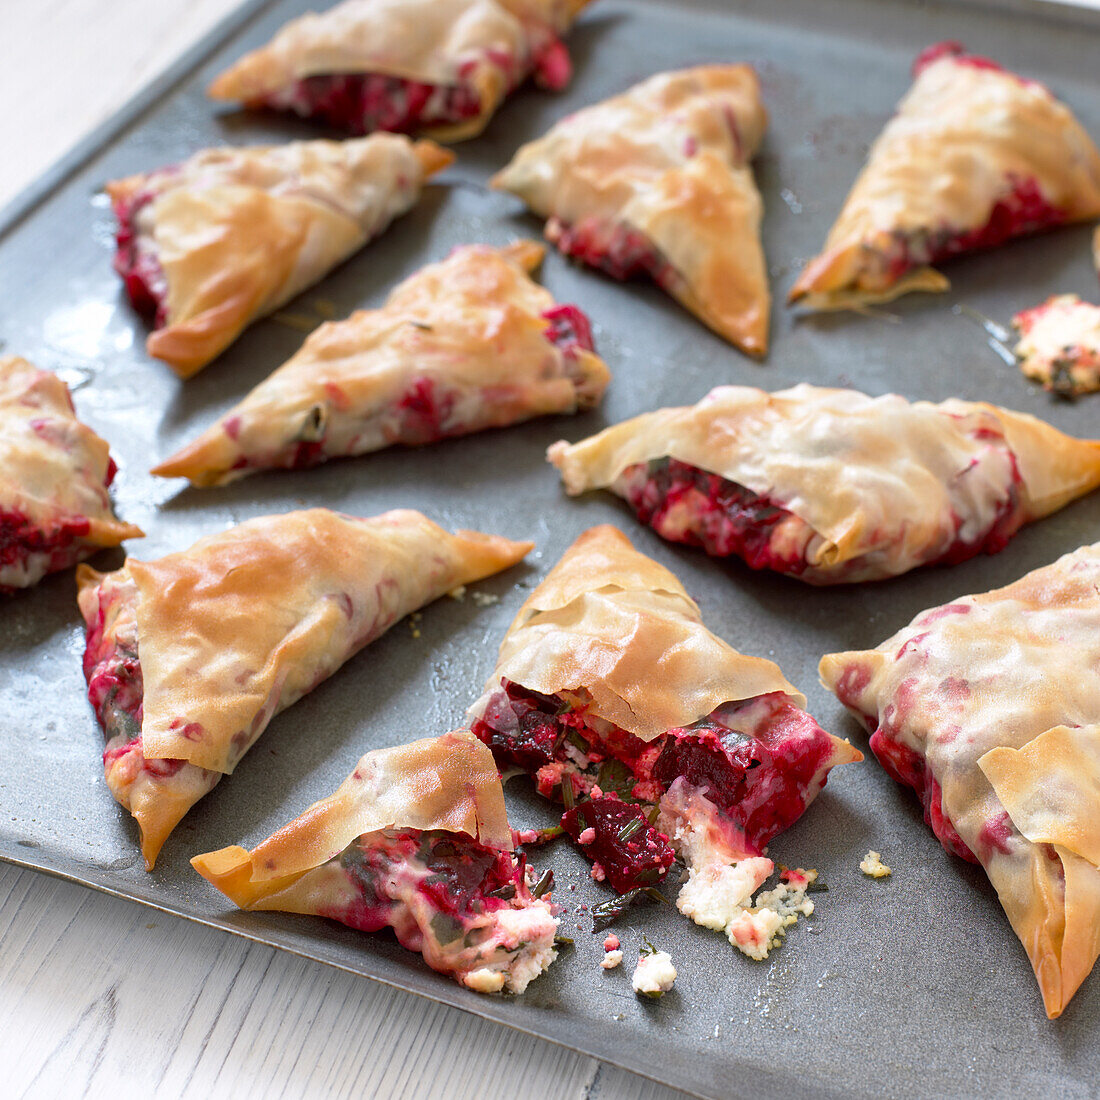 Beetroot and feta in filo pastry on baking tray